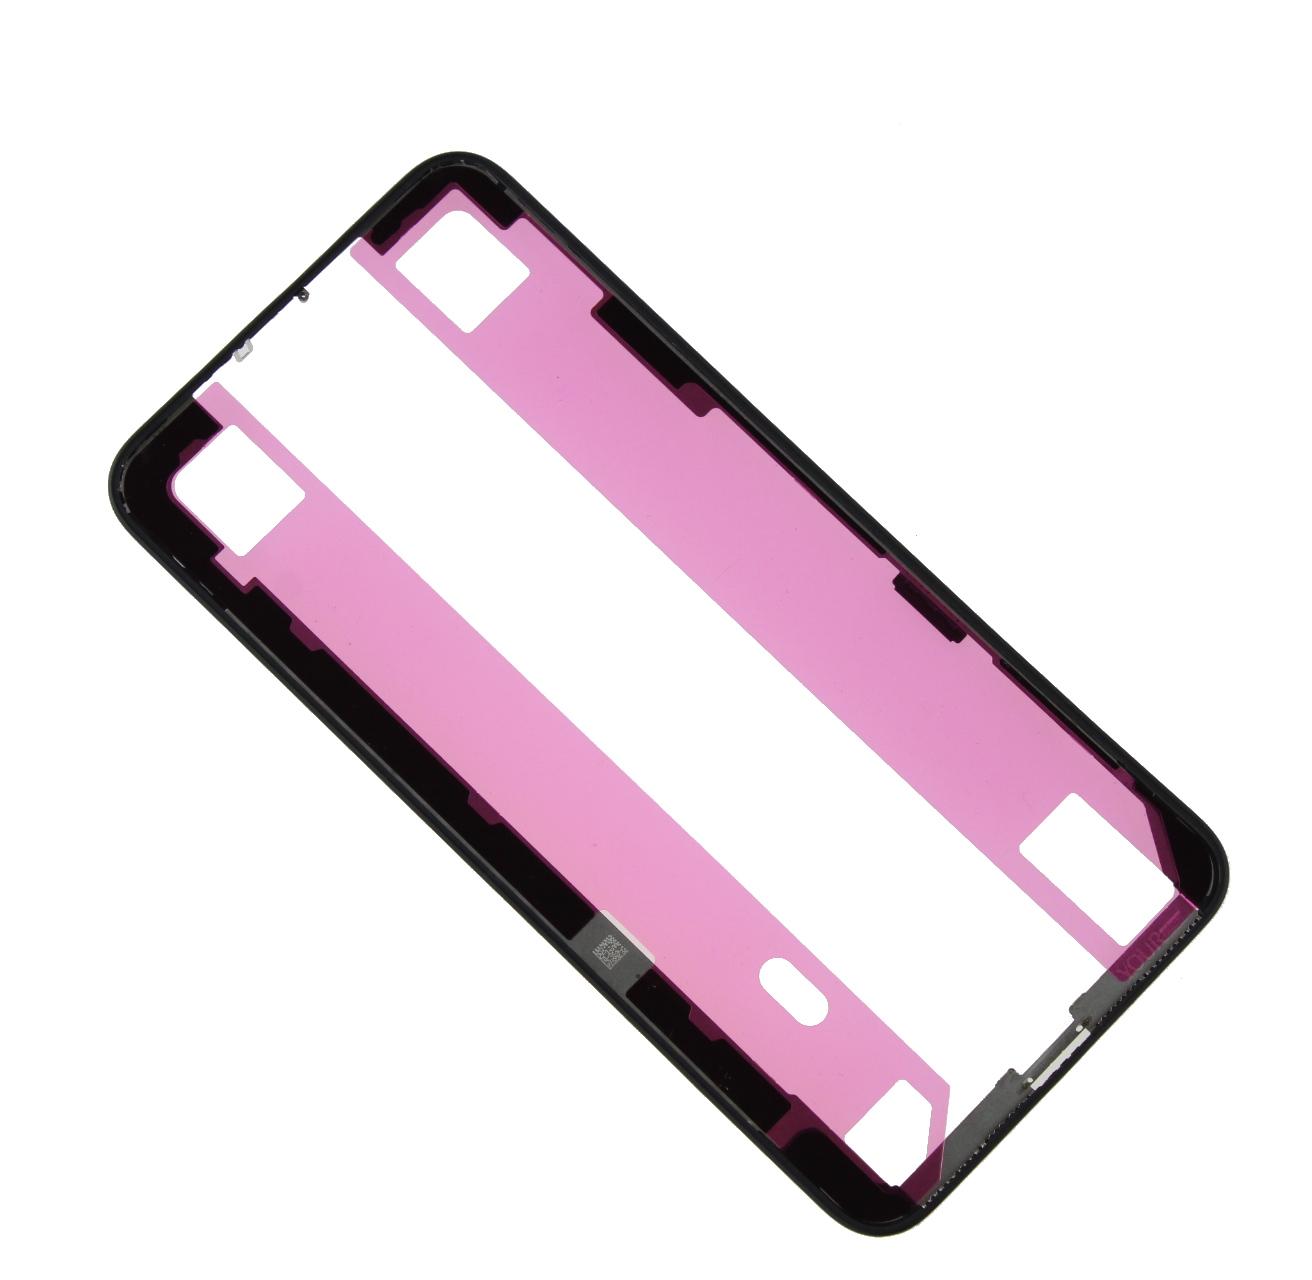 Musttby YOUR iPhone XS Max LCD frame + mounting tape